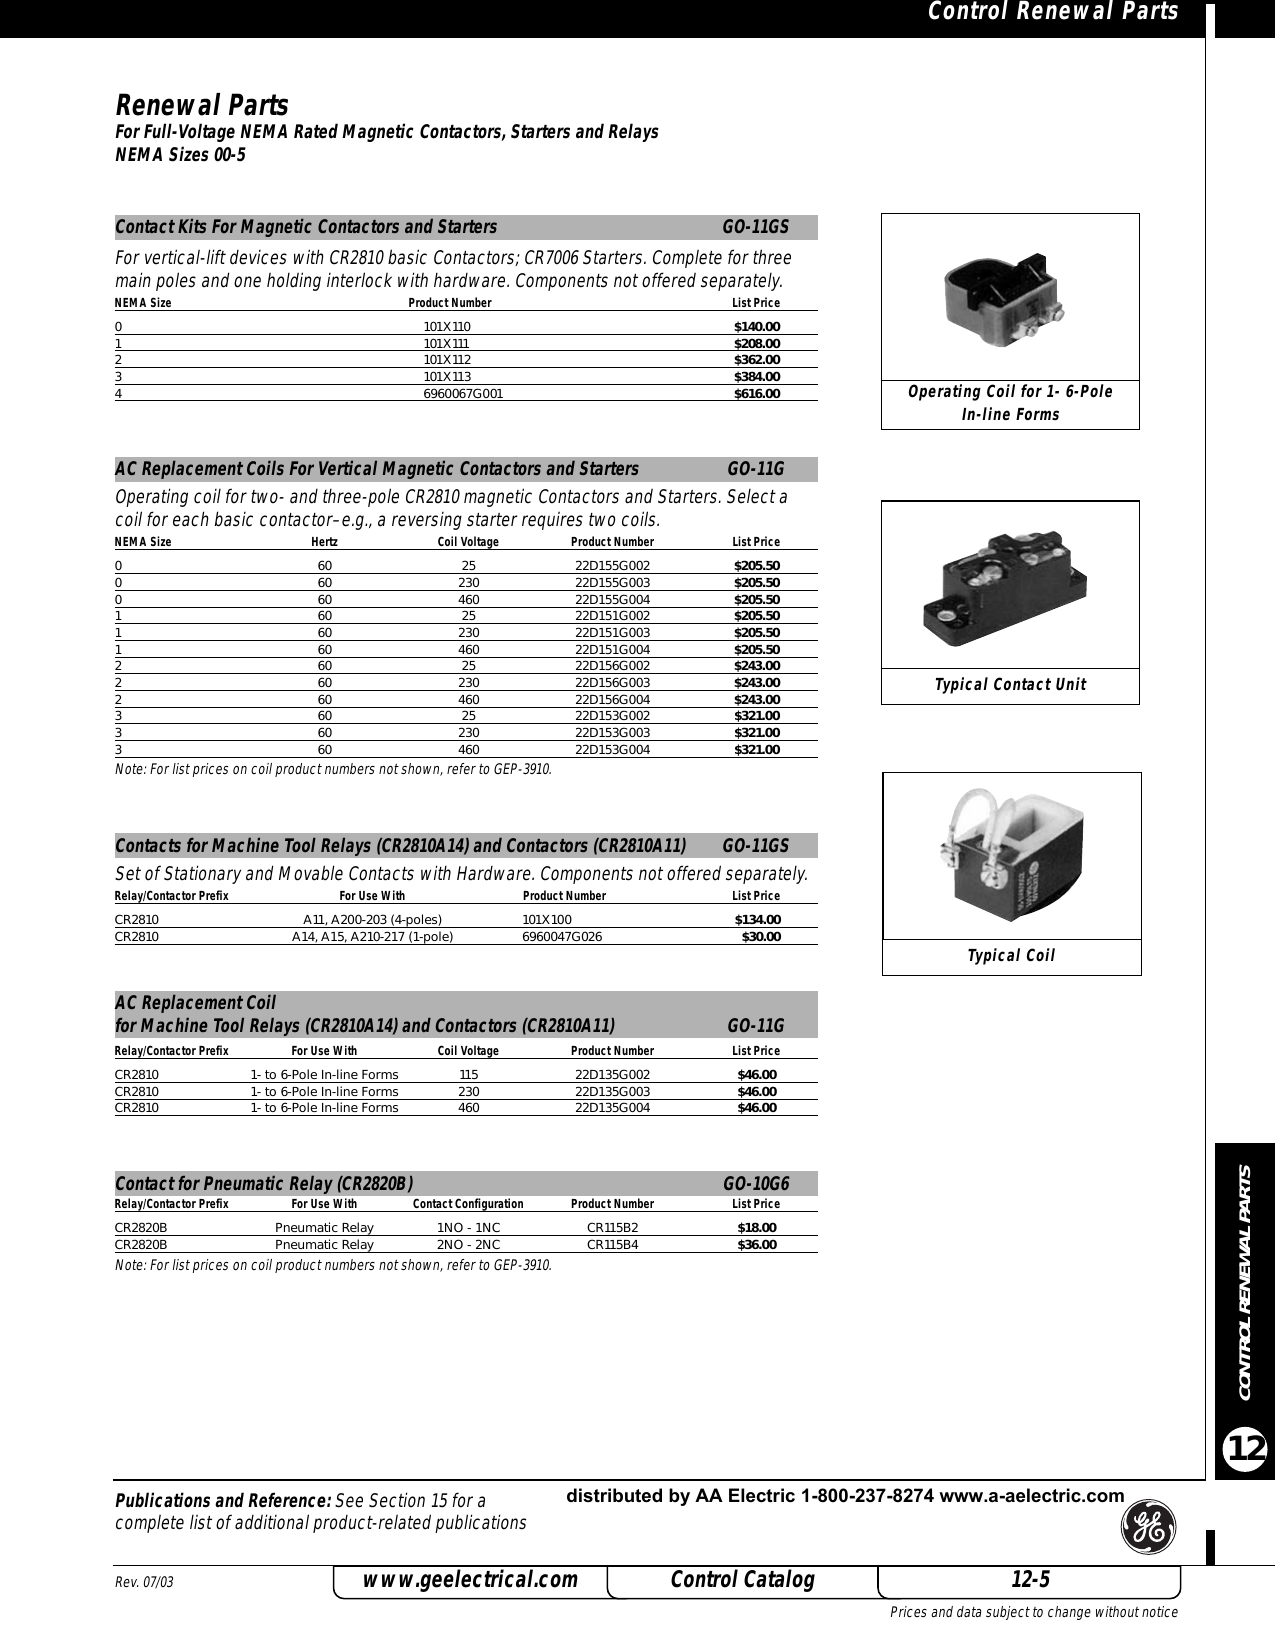 Page 5 of 8 - GE 2005 Control Catalog - Section 12  522426-Catalog